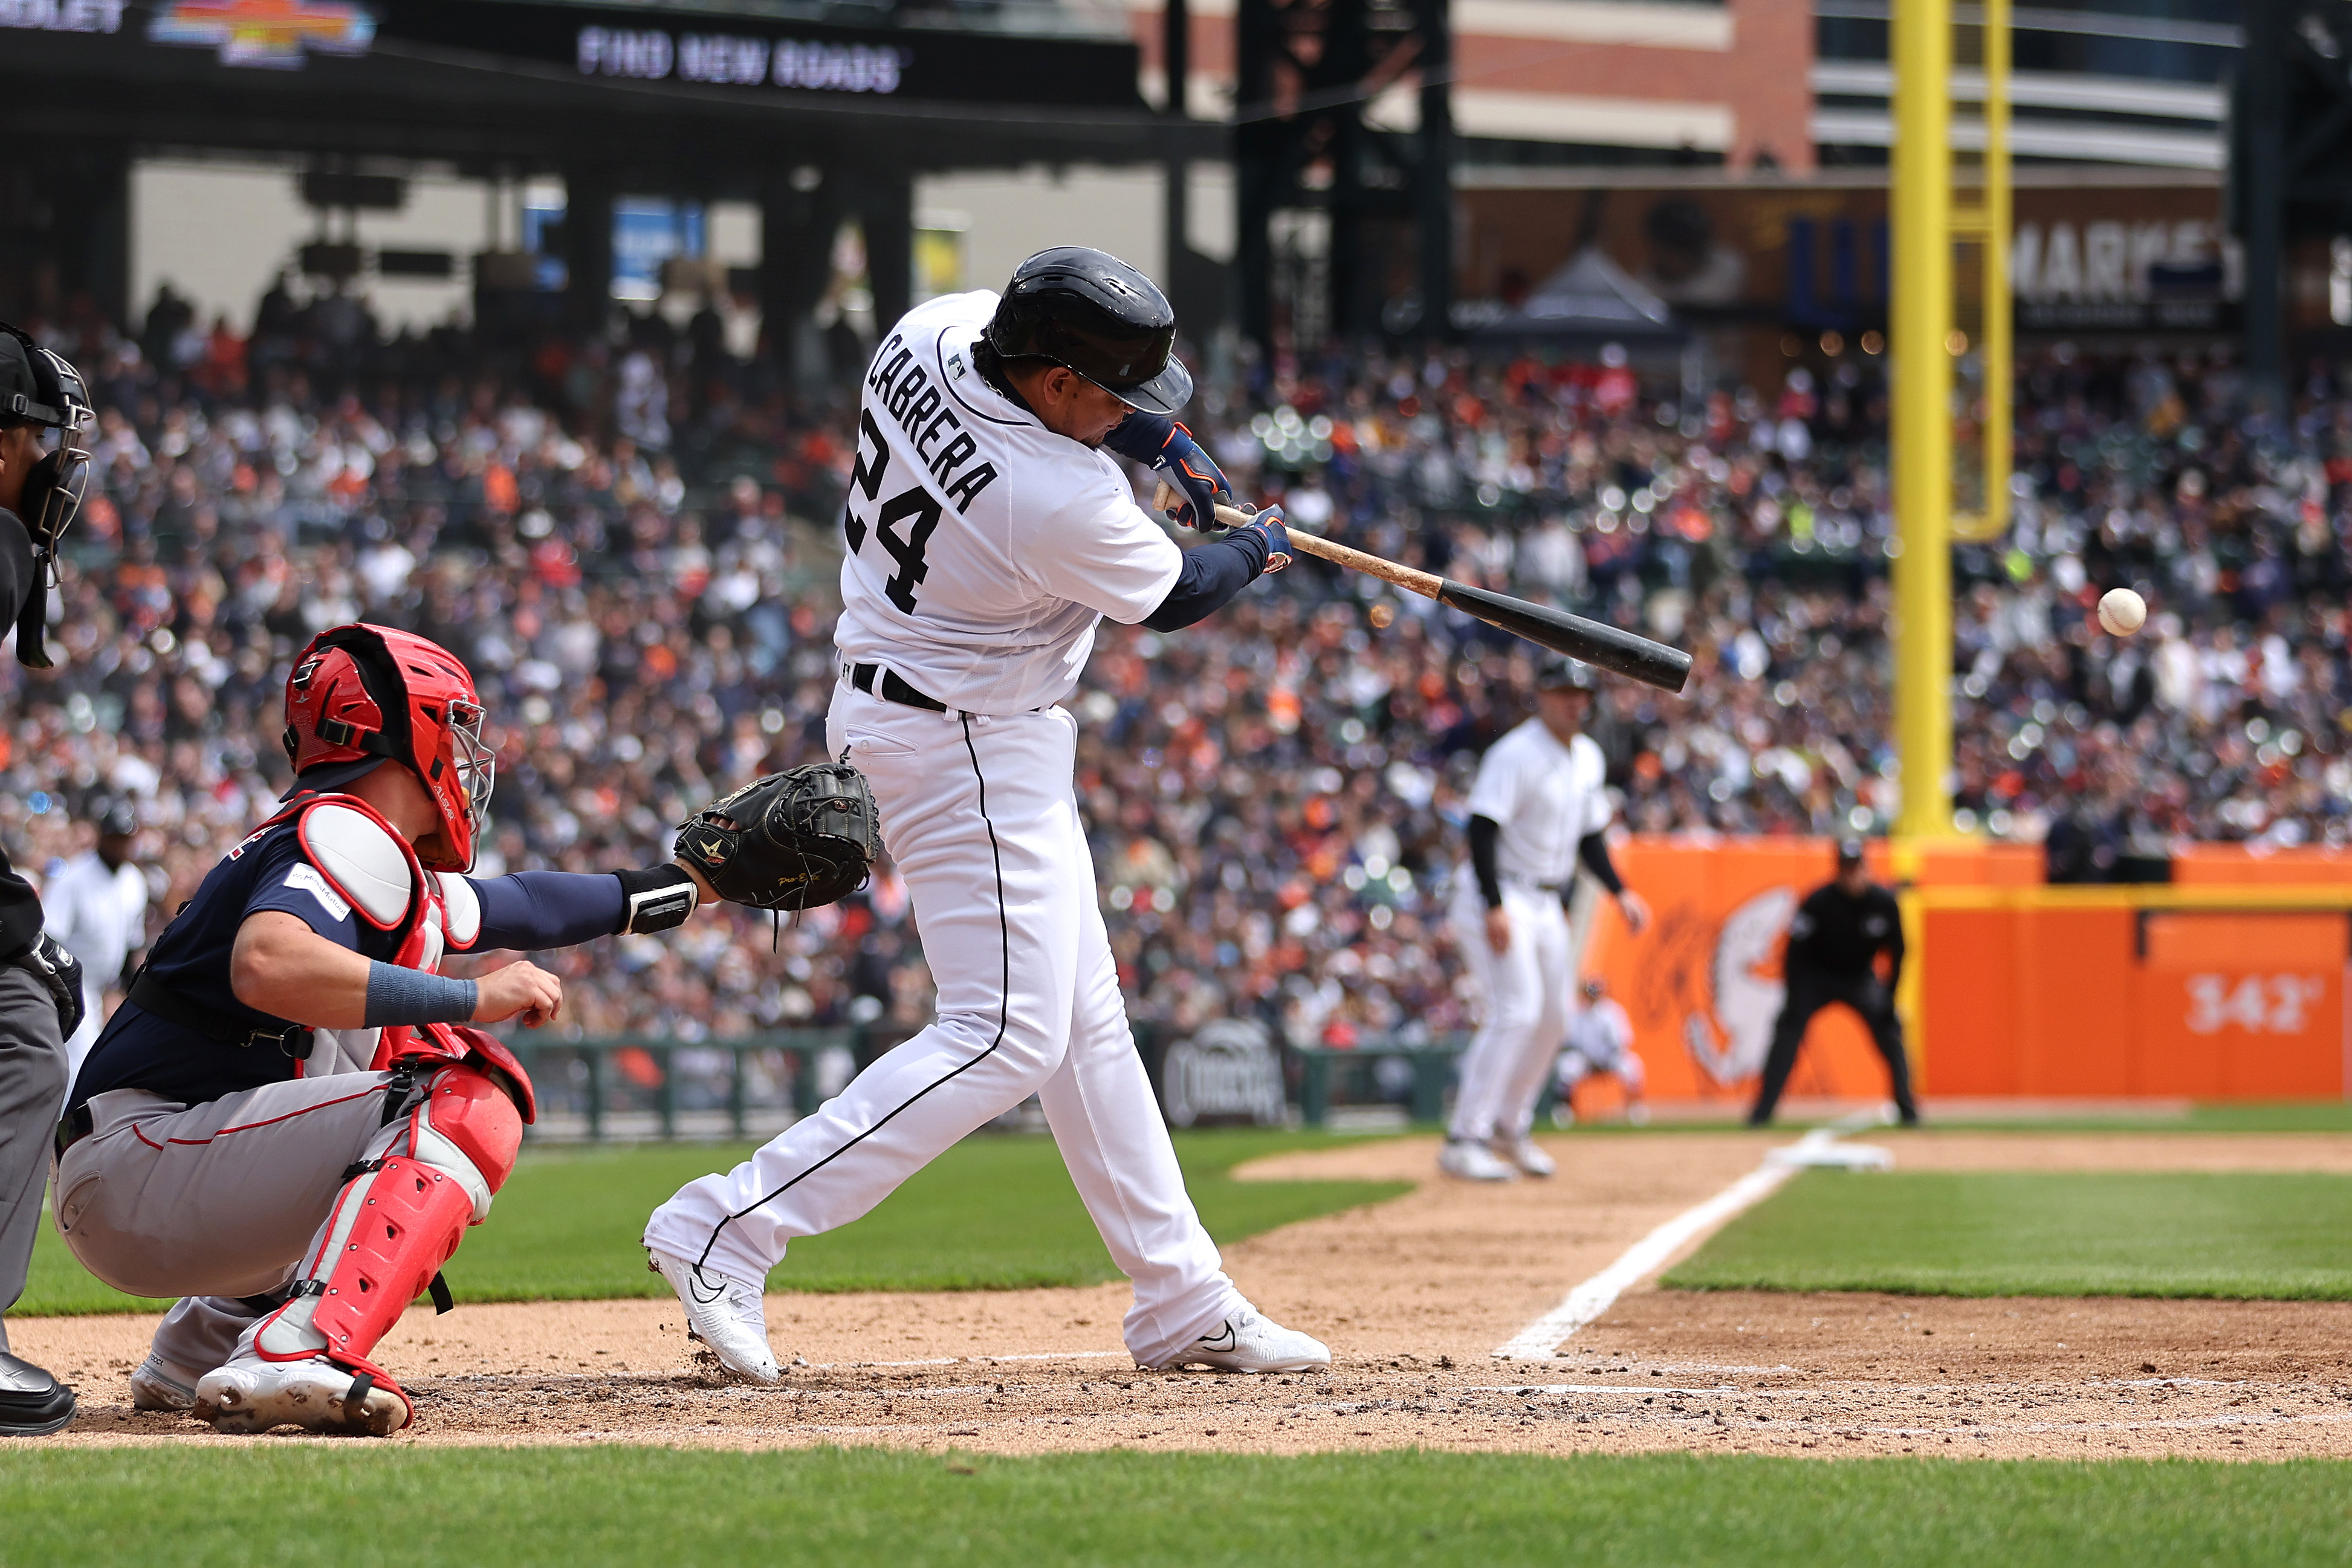 Miguel Cabrera of the Detroit Tigers fields during the Opening Day News  Photo - Getty Images